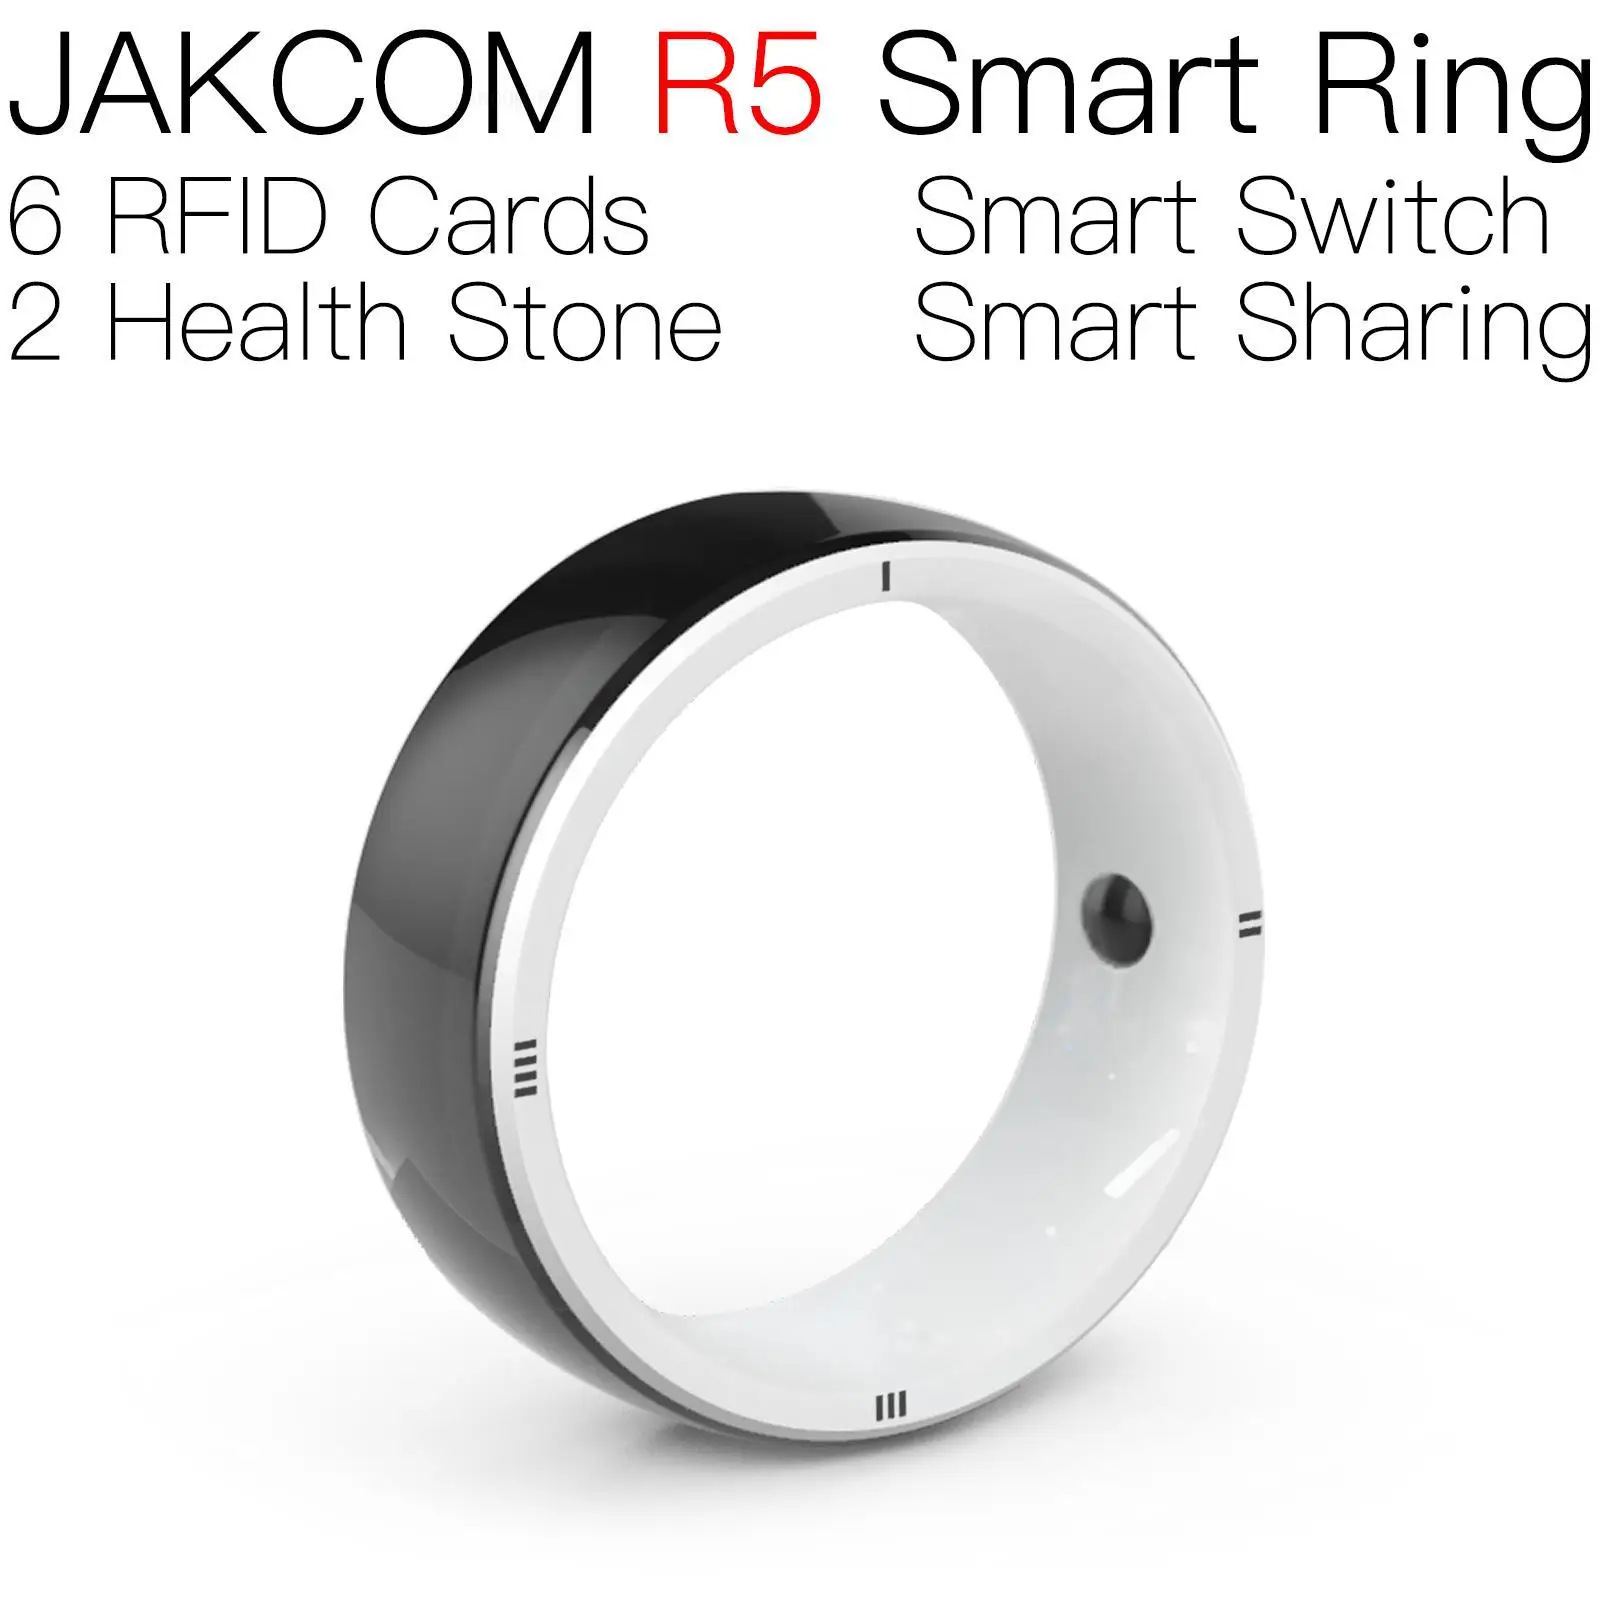 

JAKCOM R5 Smart Ring New product as switch amibo set nfc tag rfid metal sticker locksmith tools necklace programable